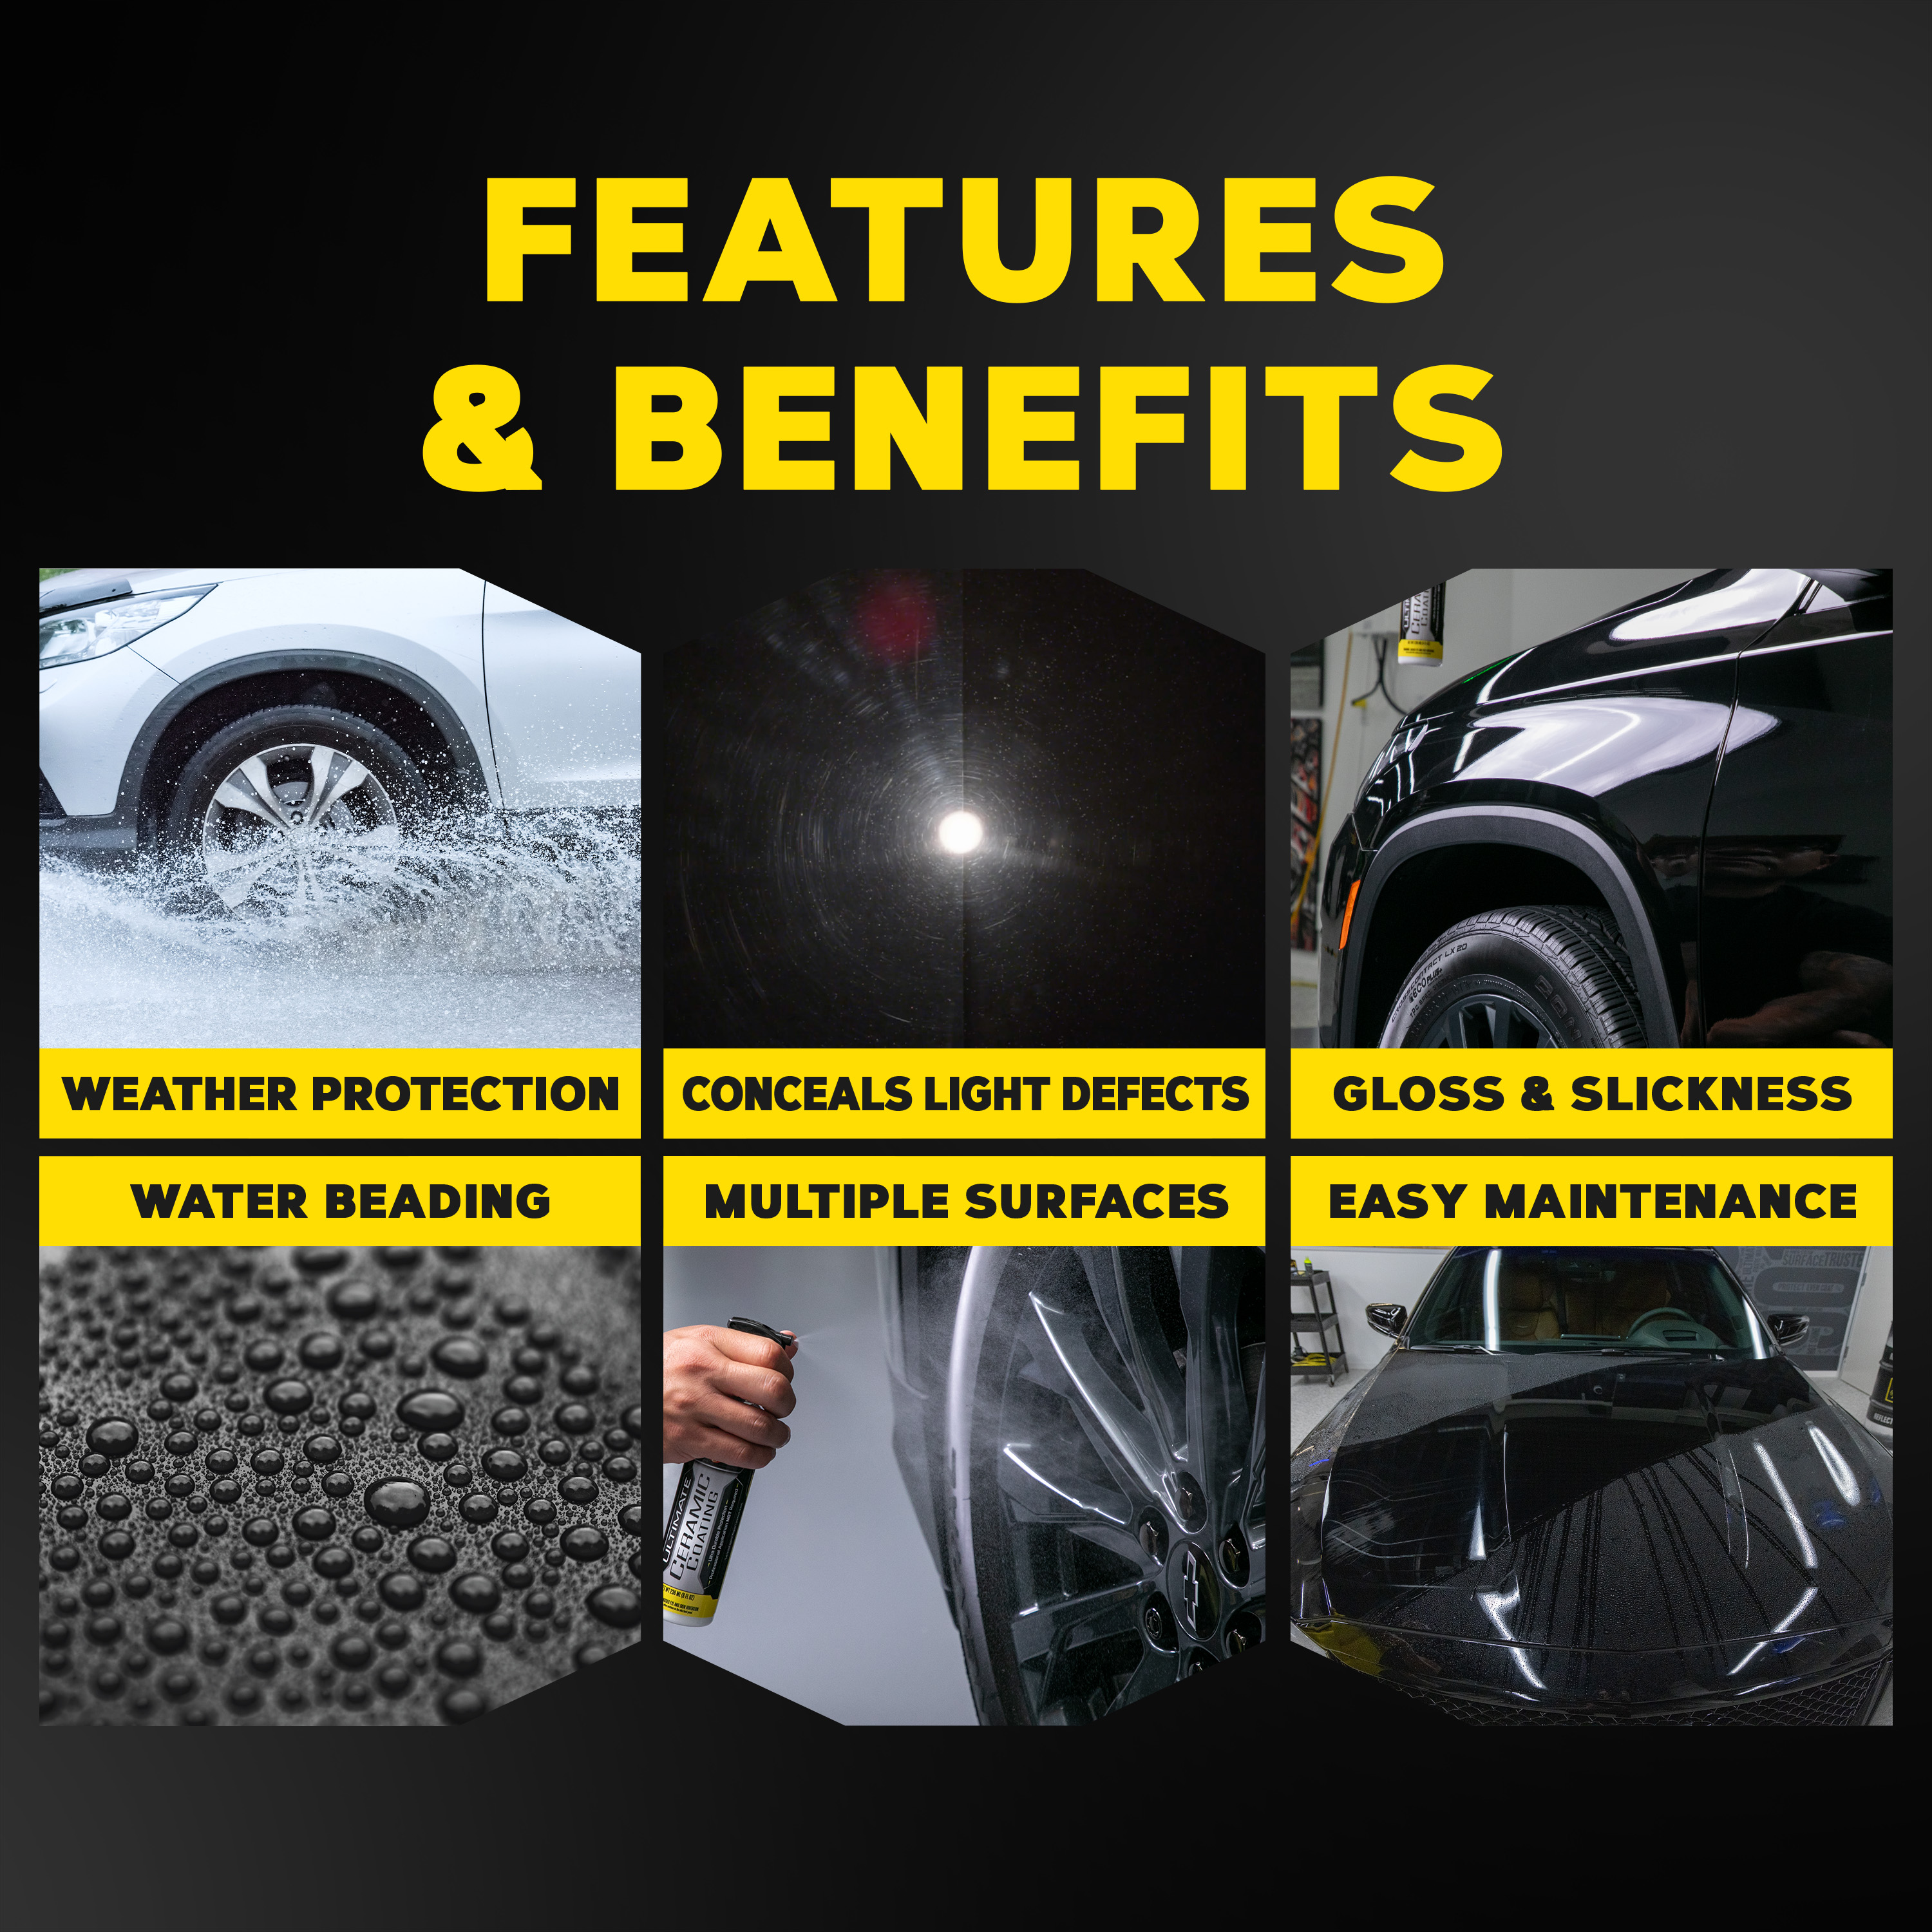 Benefits of Ceramic Coating for Your Car's Wheels